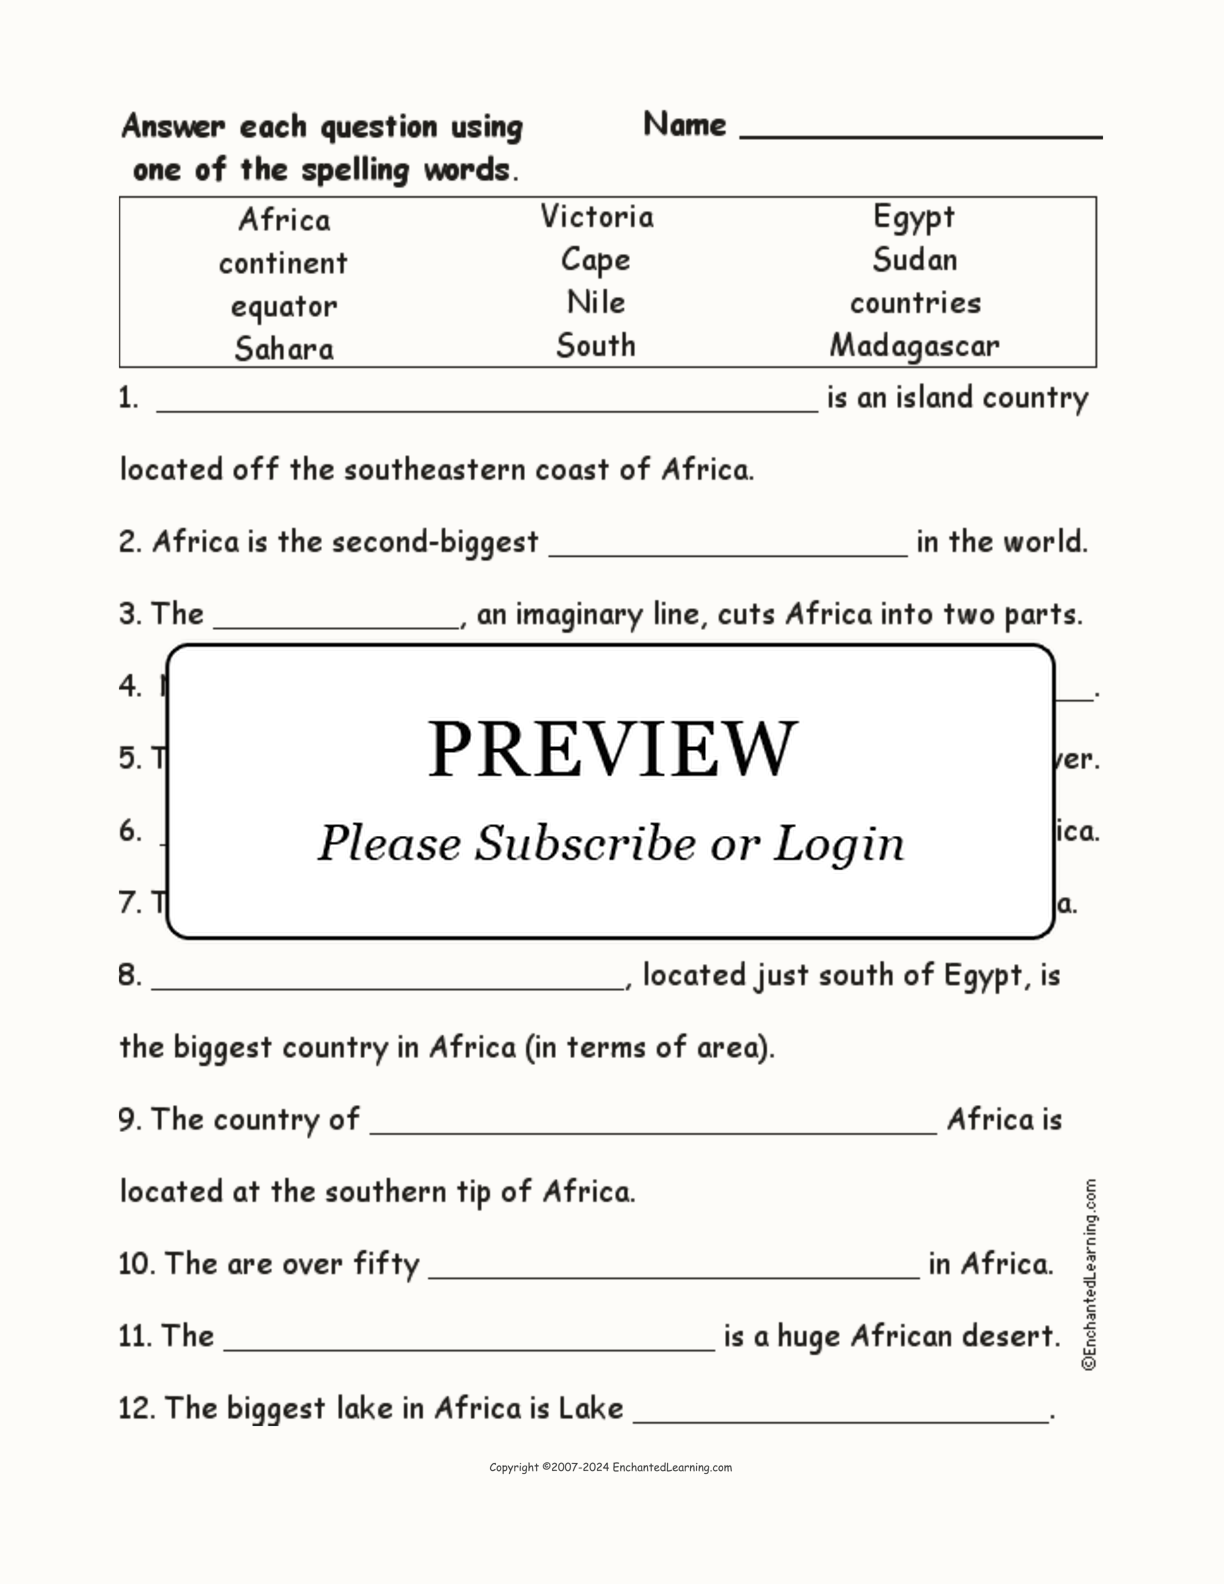 African Spelling Word Questions interactive worksheet page 1